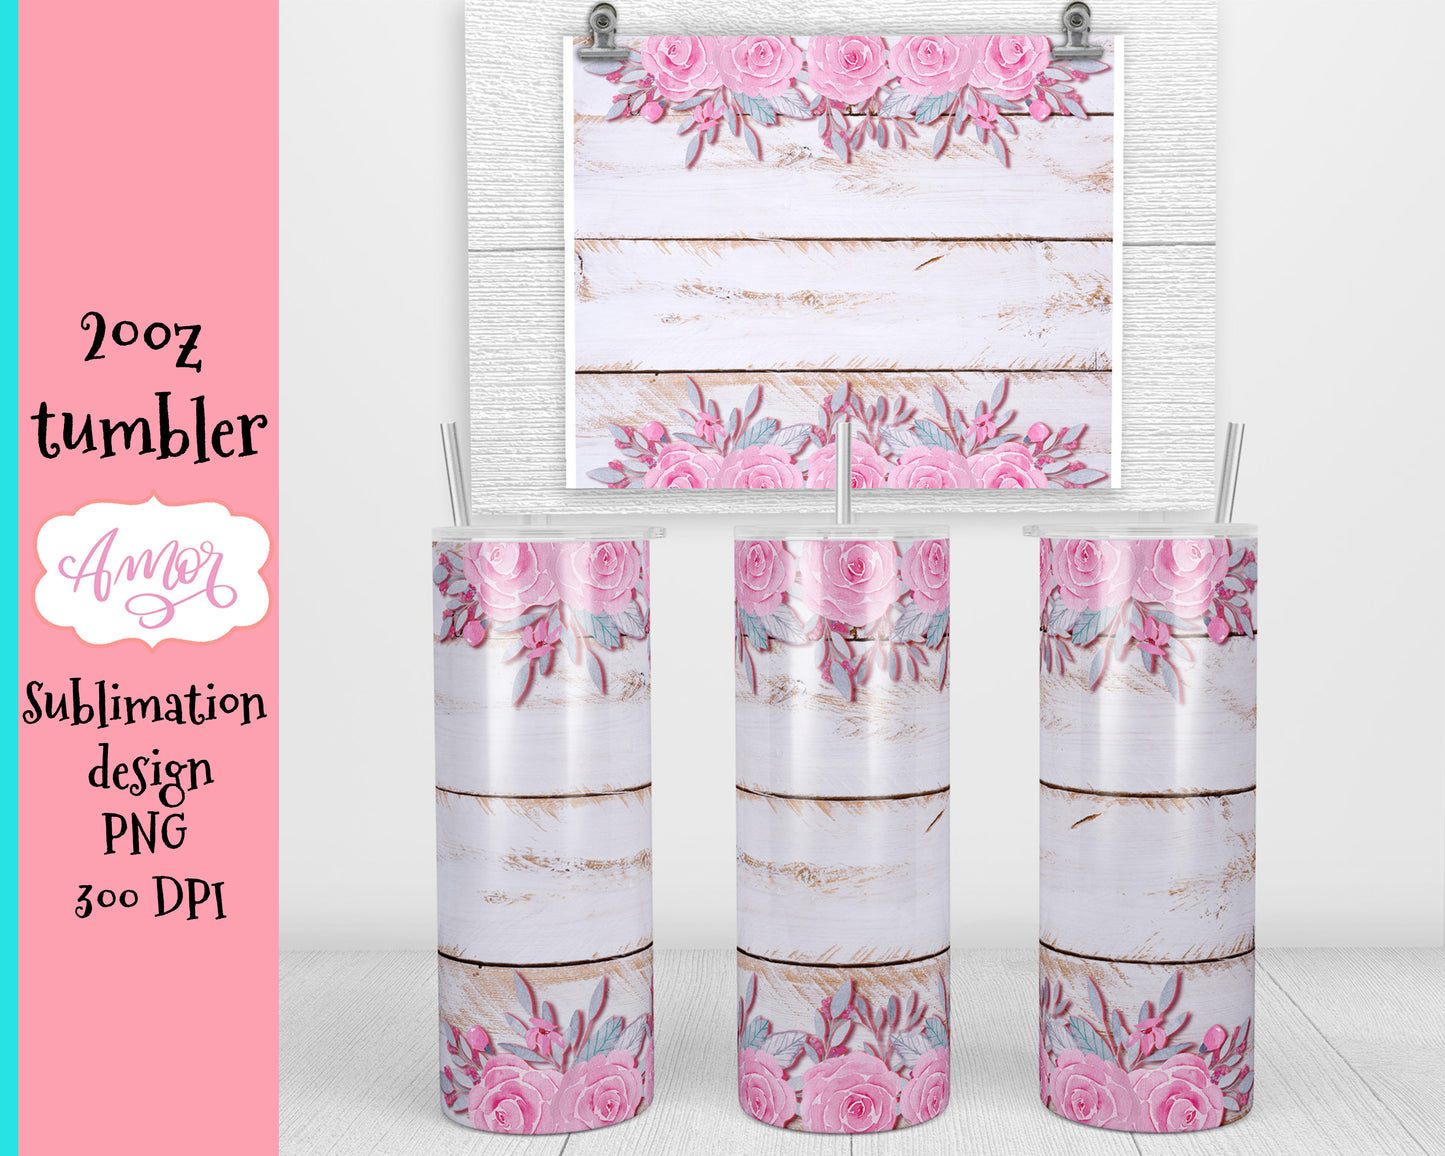 White Wood and Roses tumbler design for sublimation